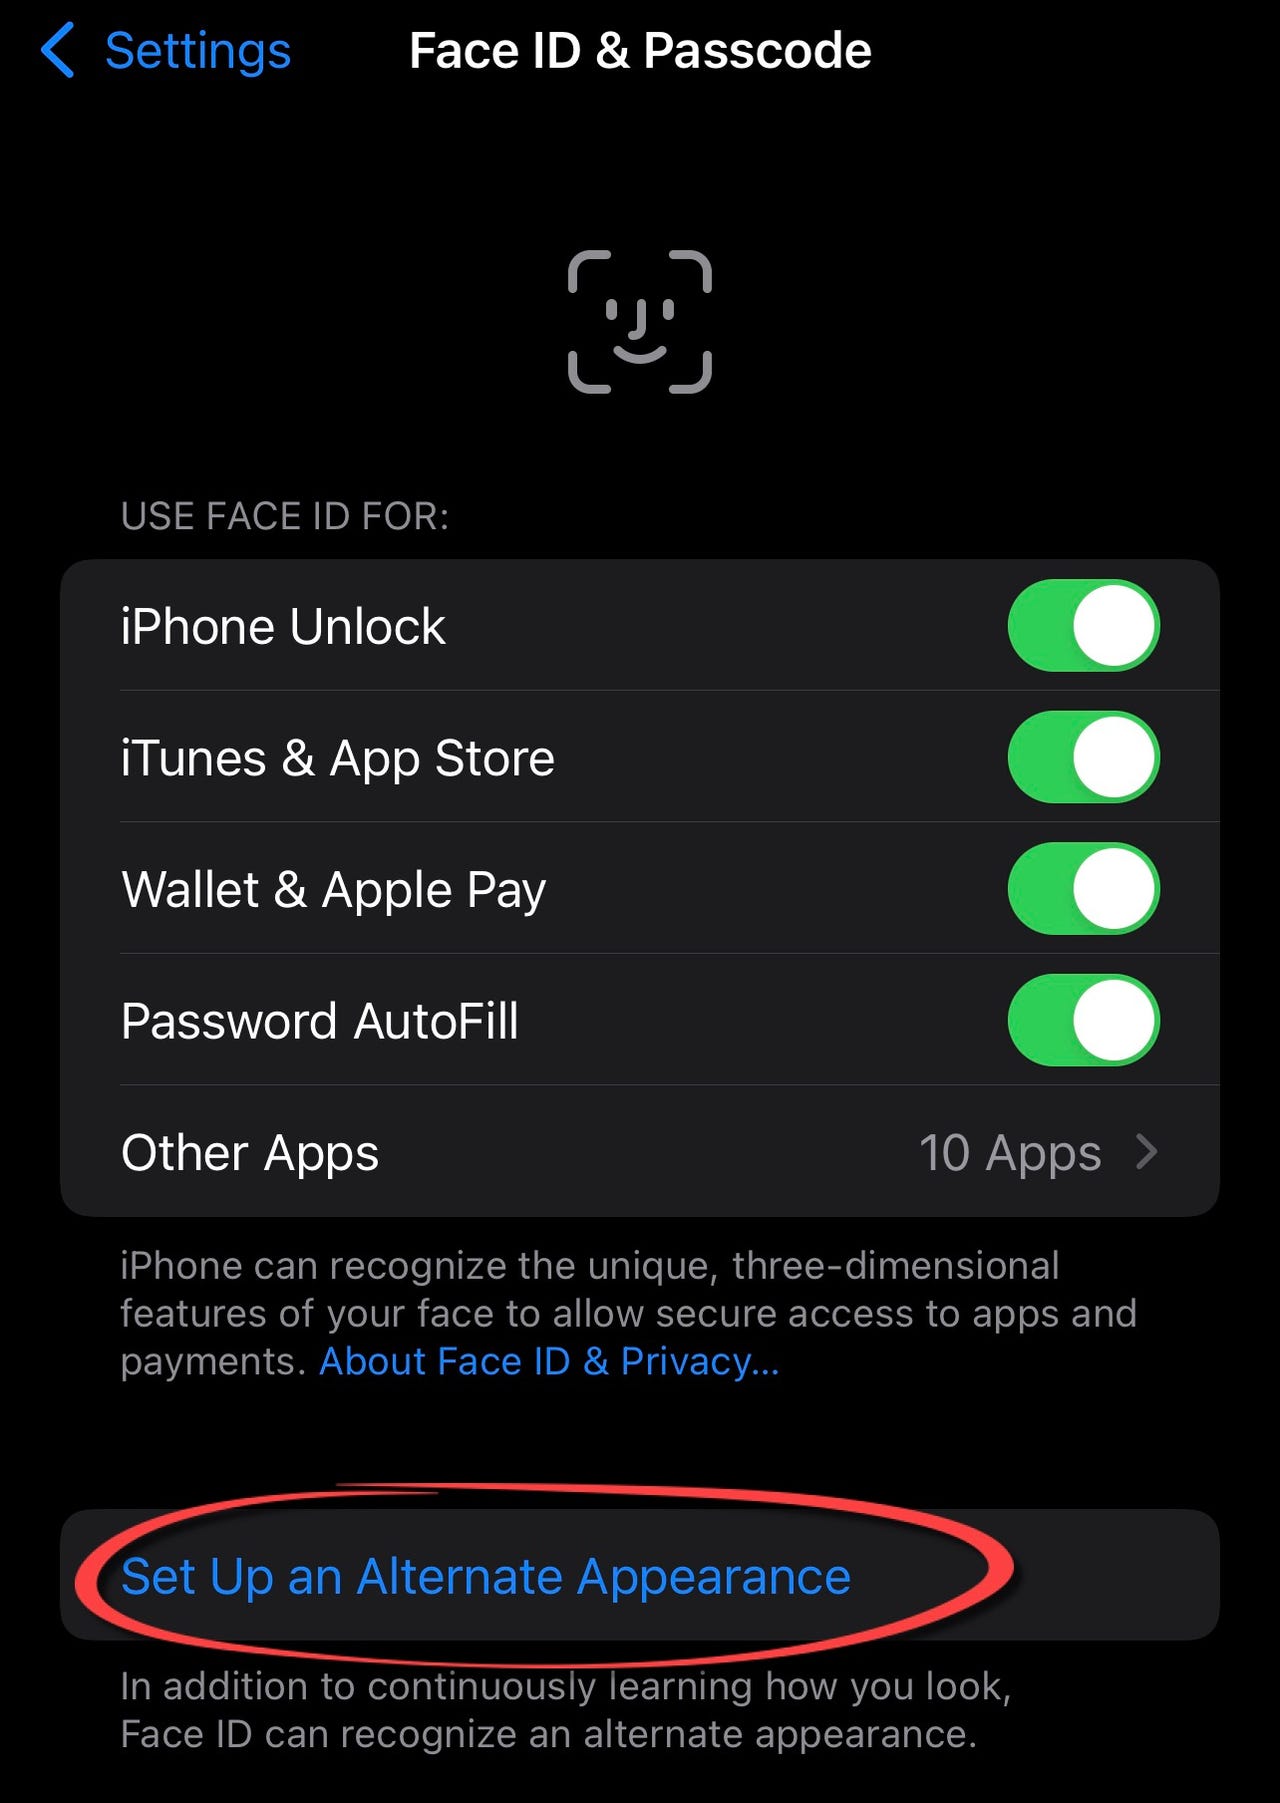 Can someone else unlock my iPhone with Face ID?